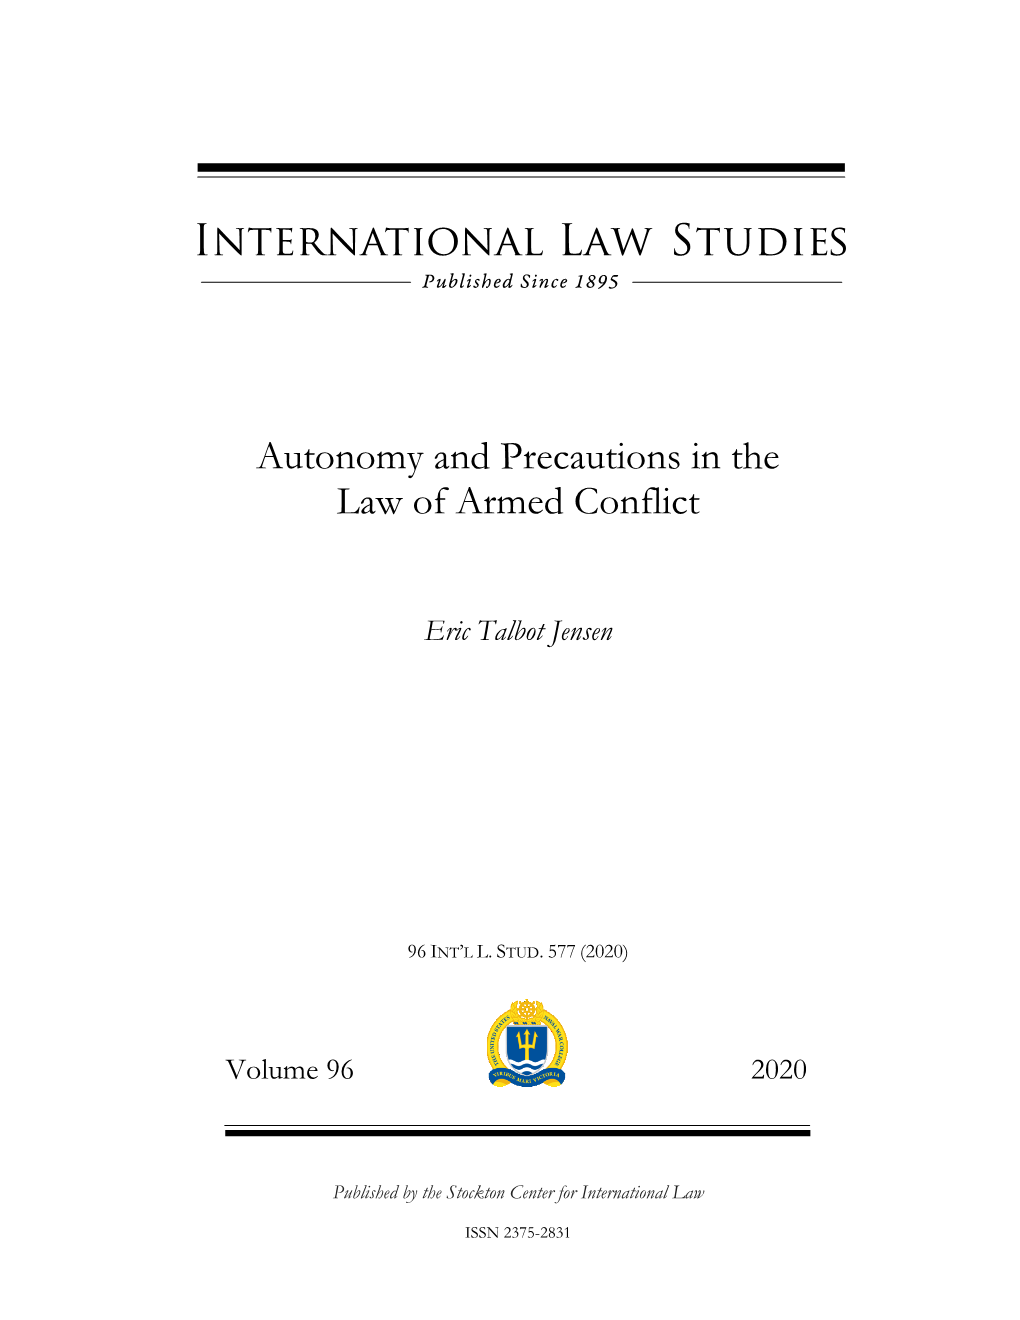 Autonomy and Precautions in the Law of Armed Conflict